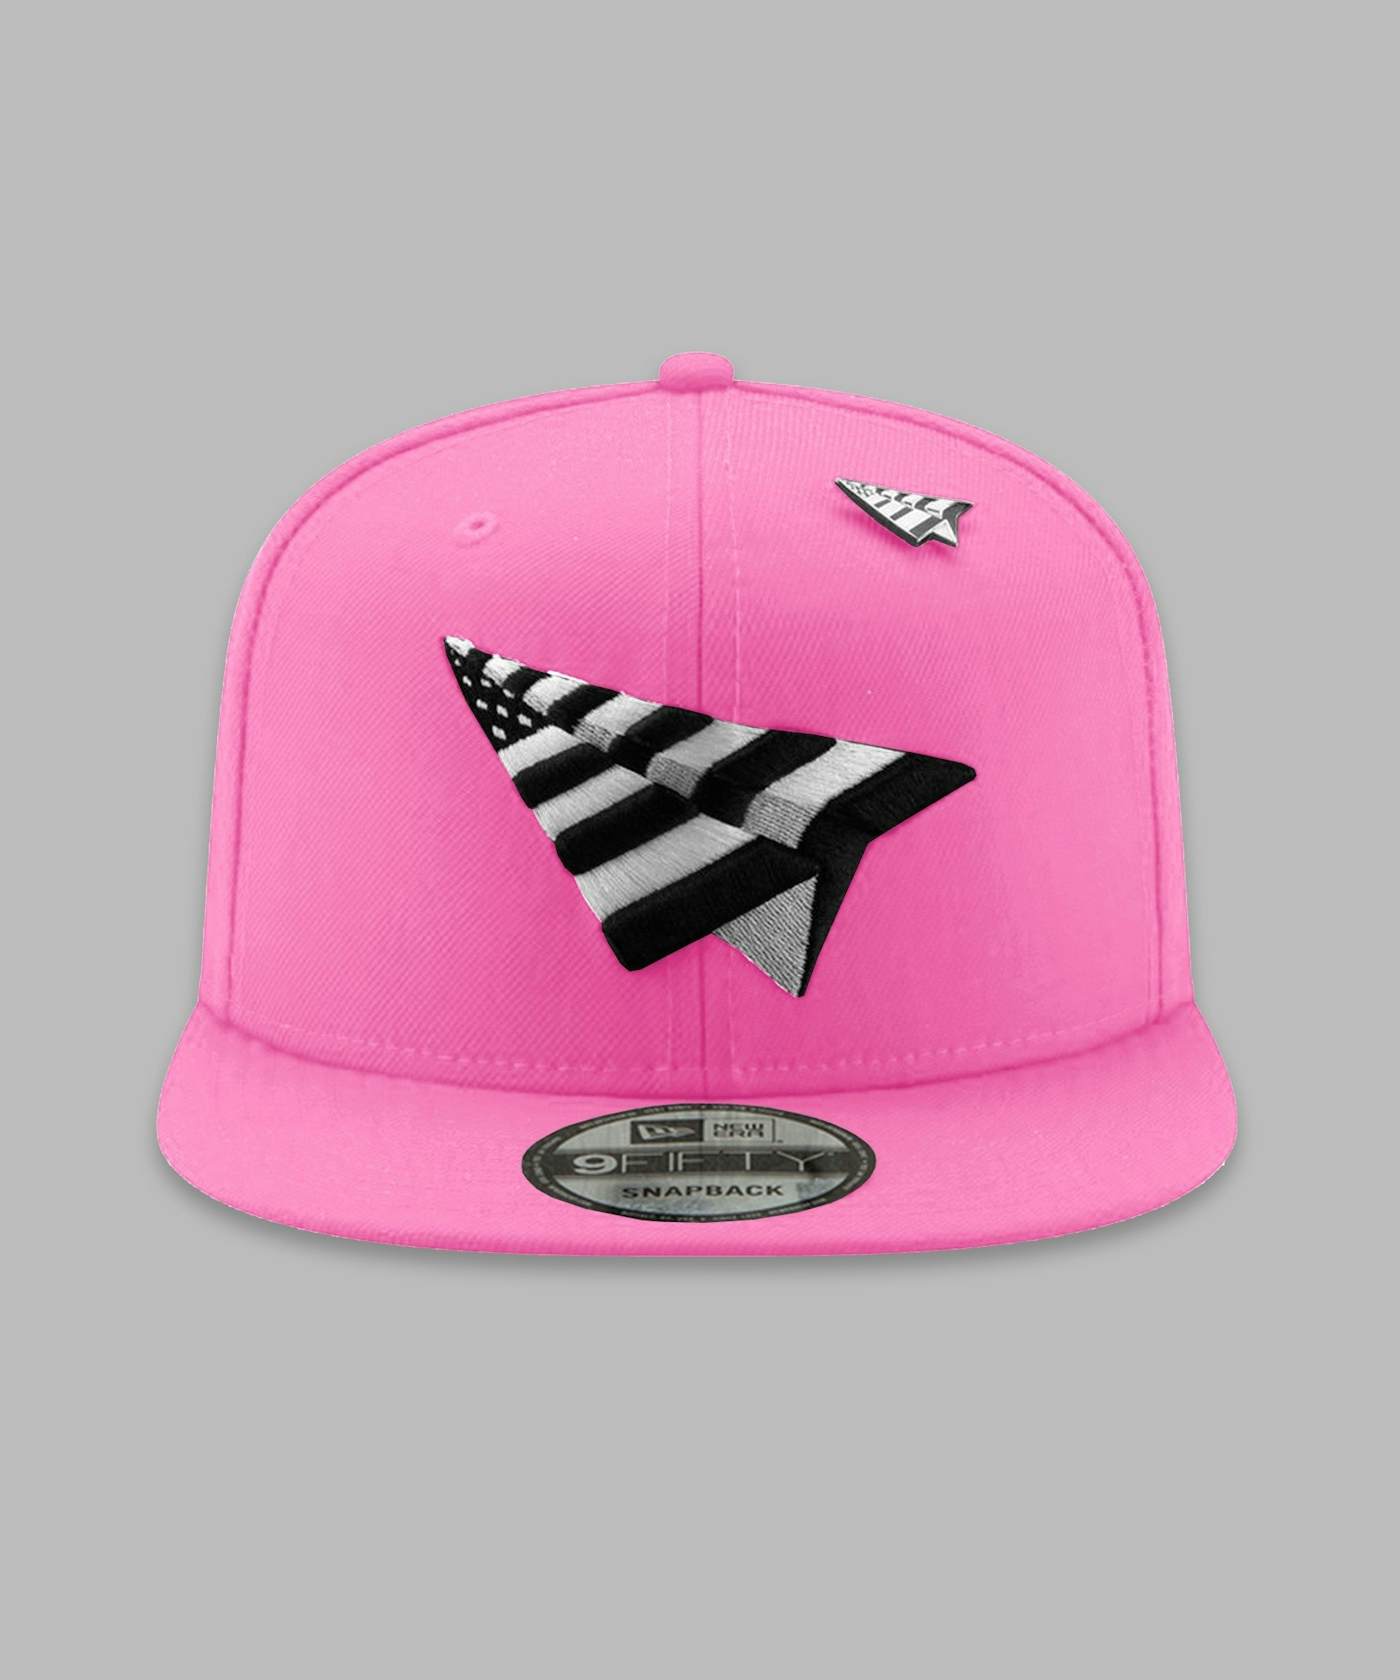 Pink High The Crown Run Hat On II 9Fifty Snapback